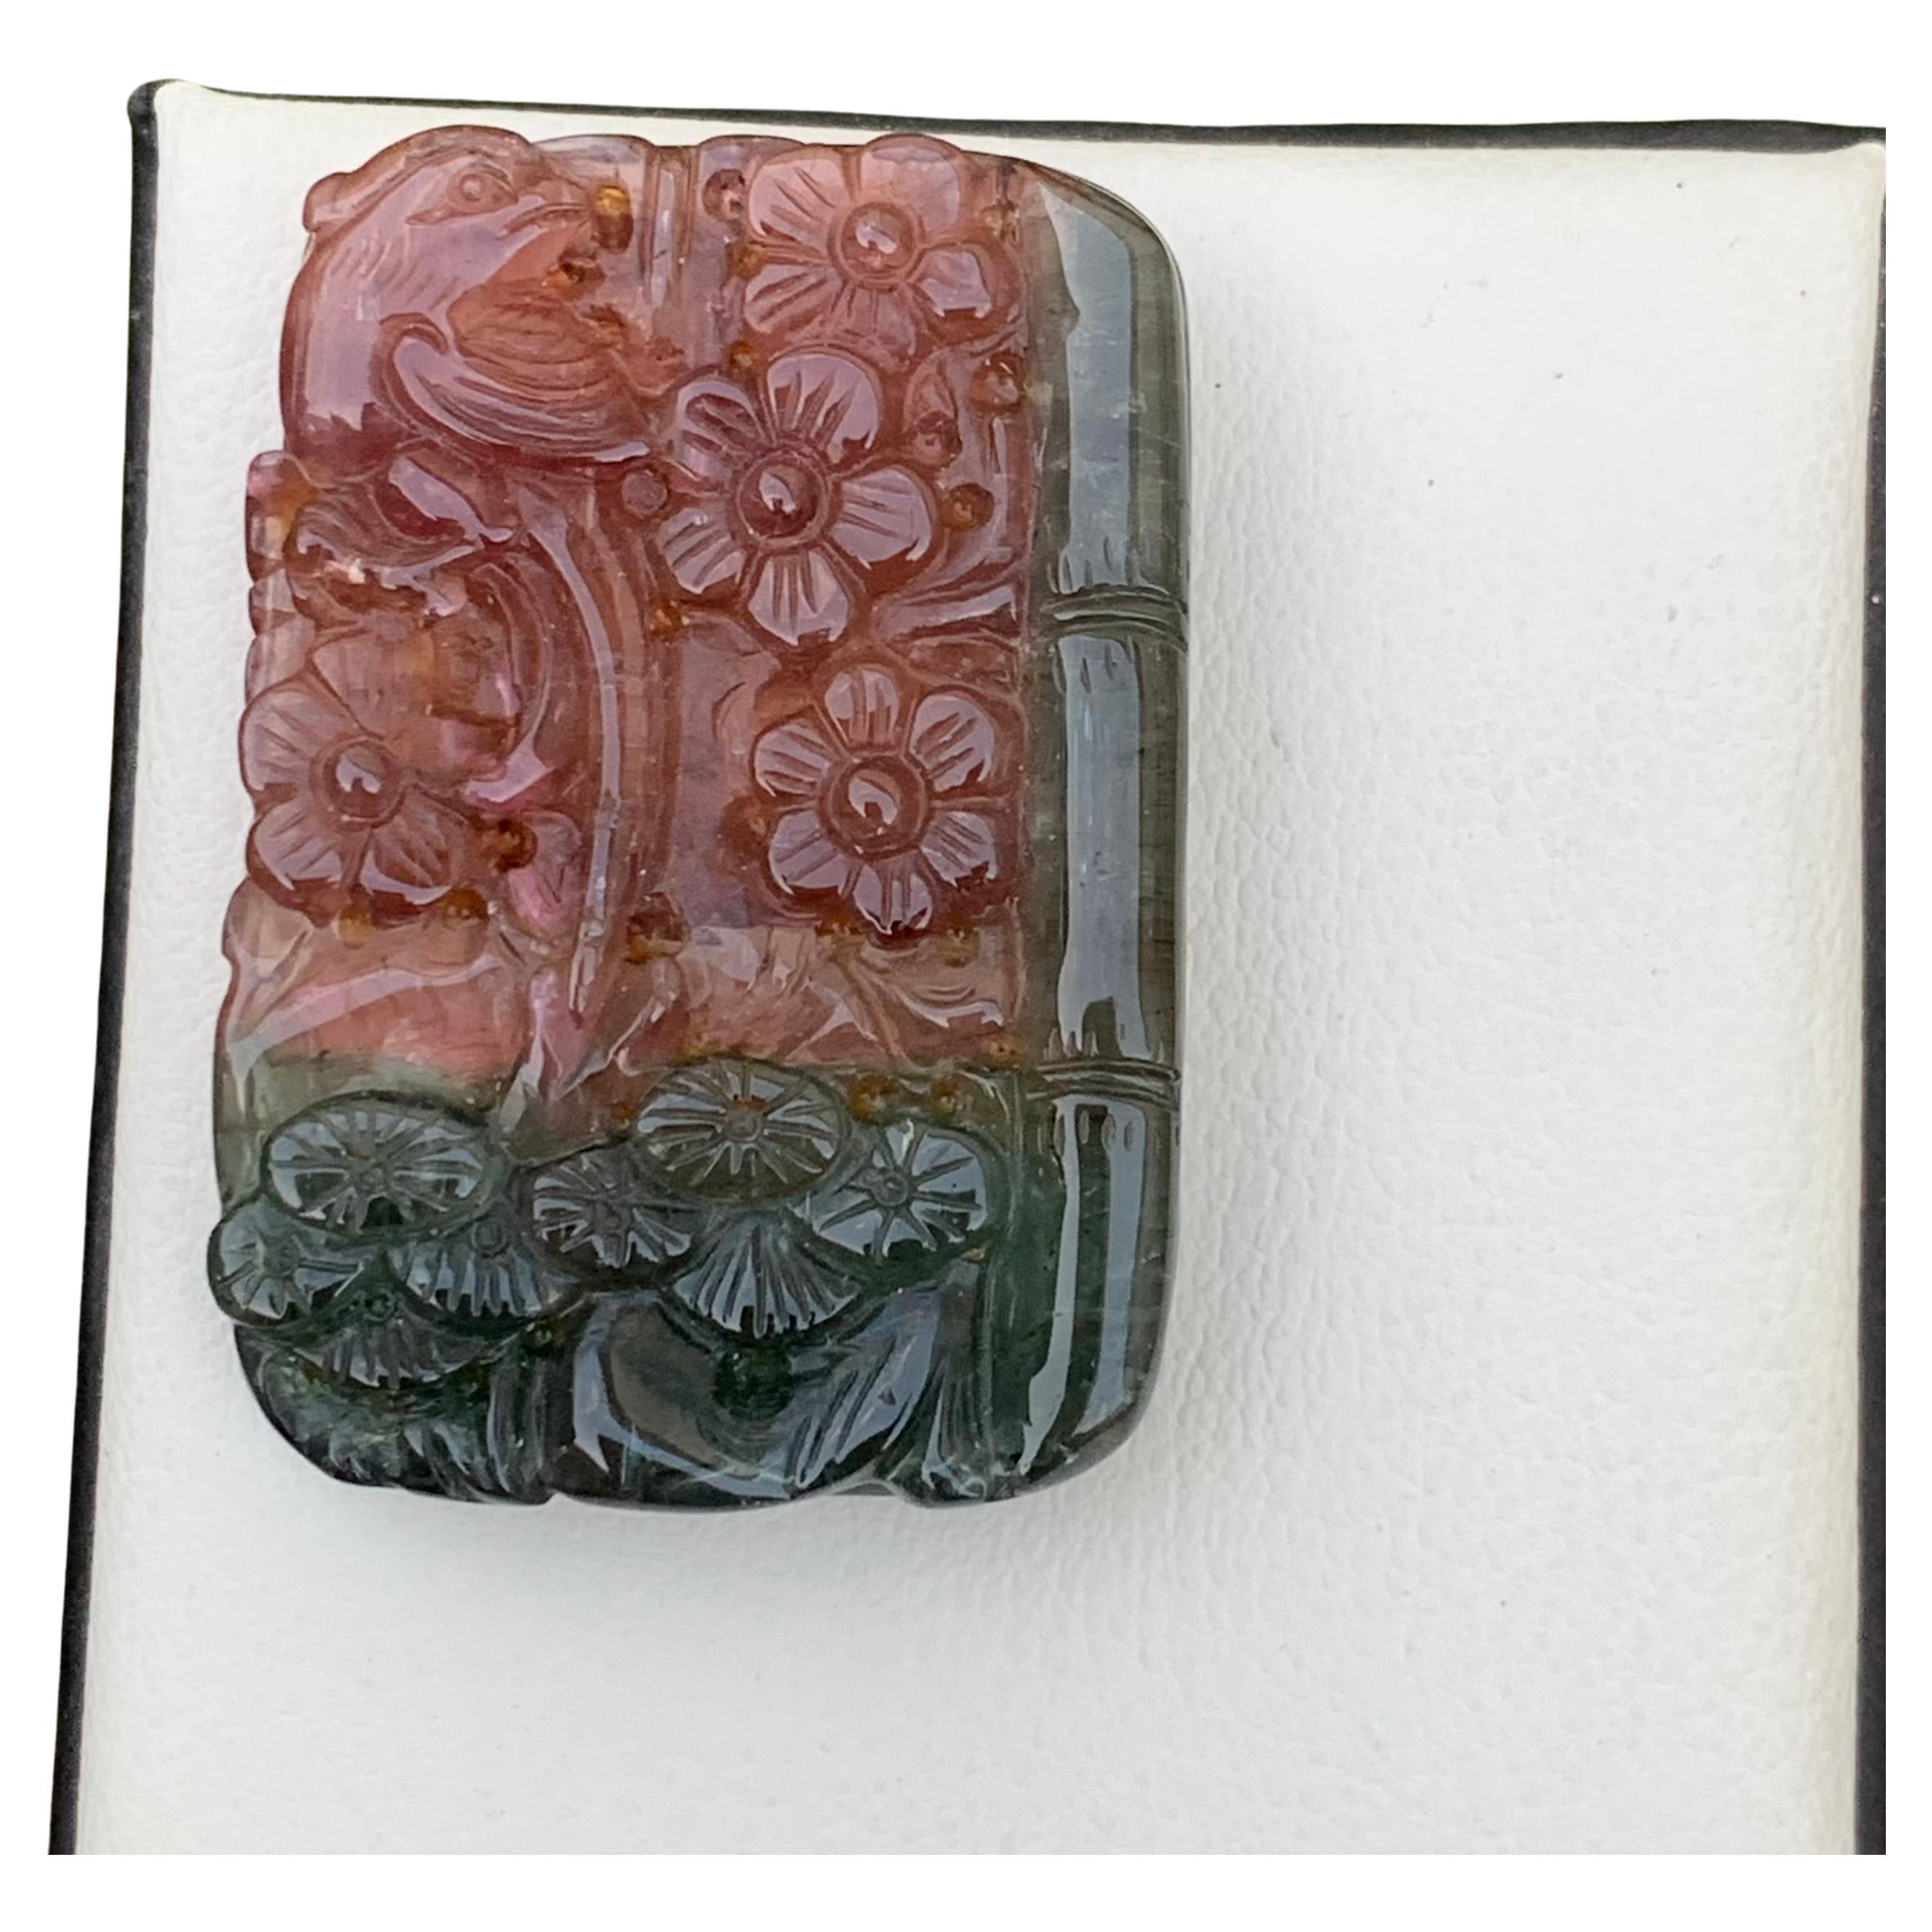 Carving Tourmaline 
Weight: 112 Carats 
Dimension: 40.4x30x7 Mm
Origin: Africa
Shape: Carving
Cut: Flower
Tourmaline carving is a specialized and intricate art form that involves sculpting or shaping tourmaline gemstones to create exquisite and